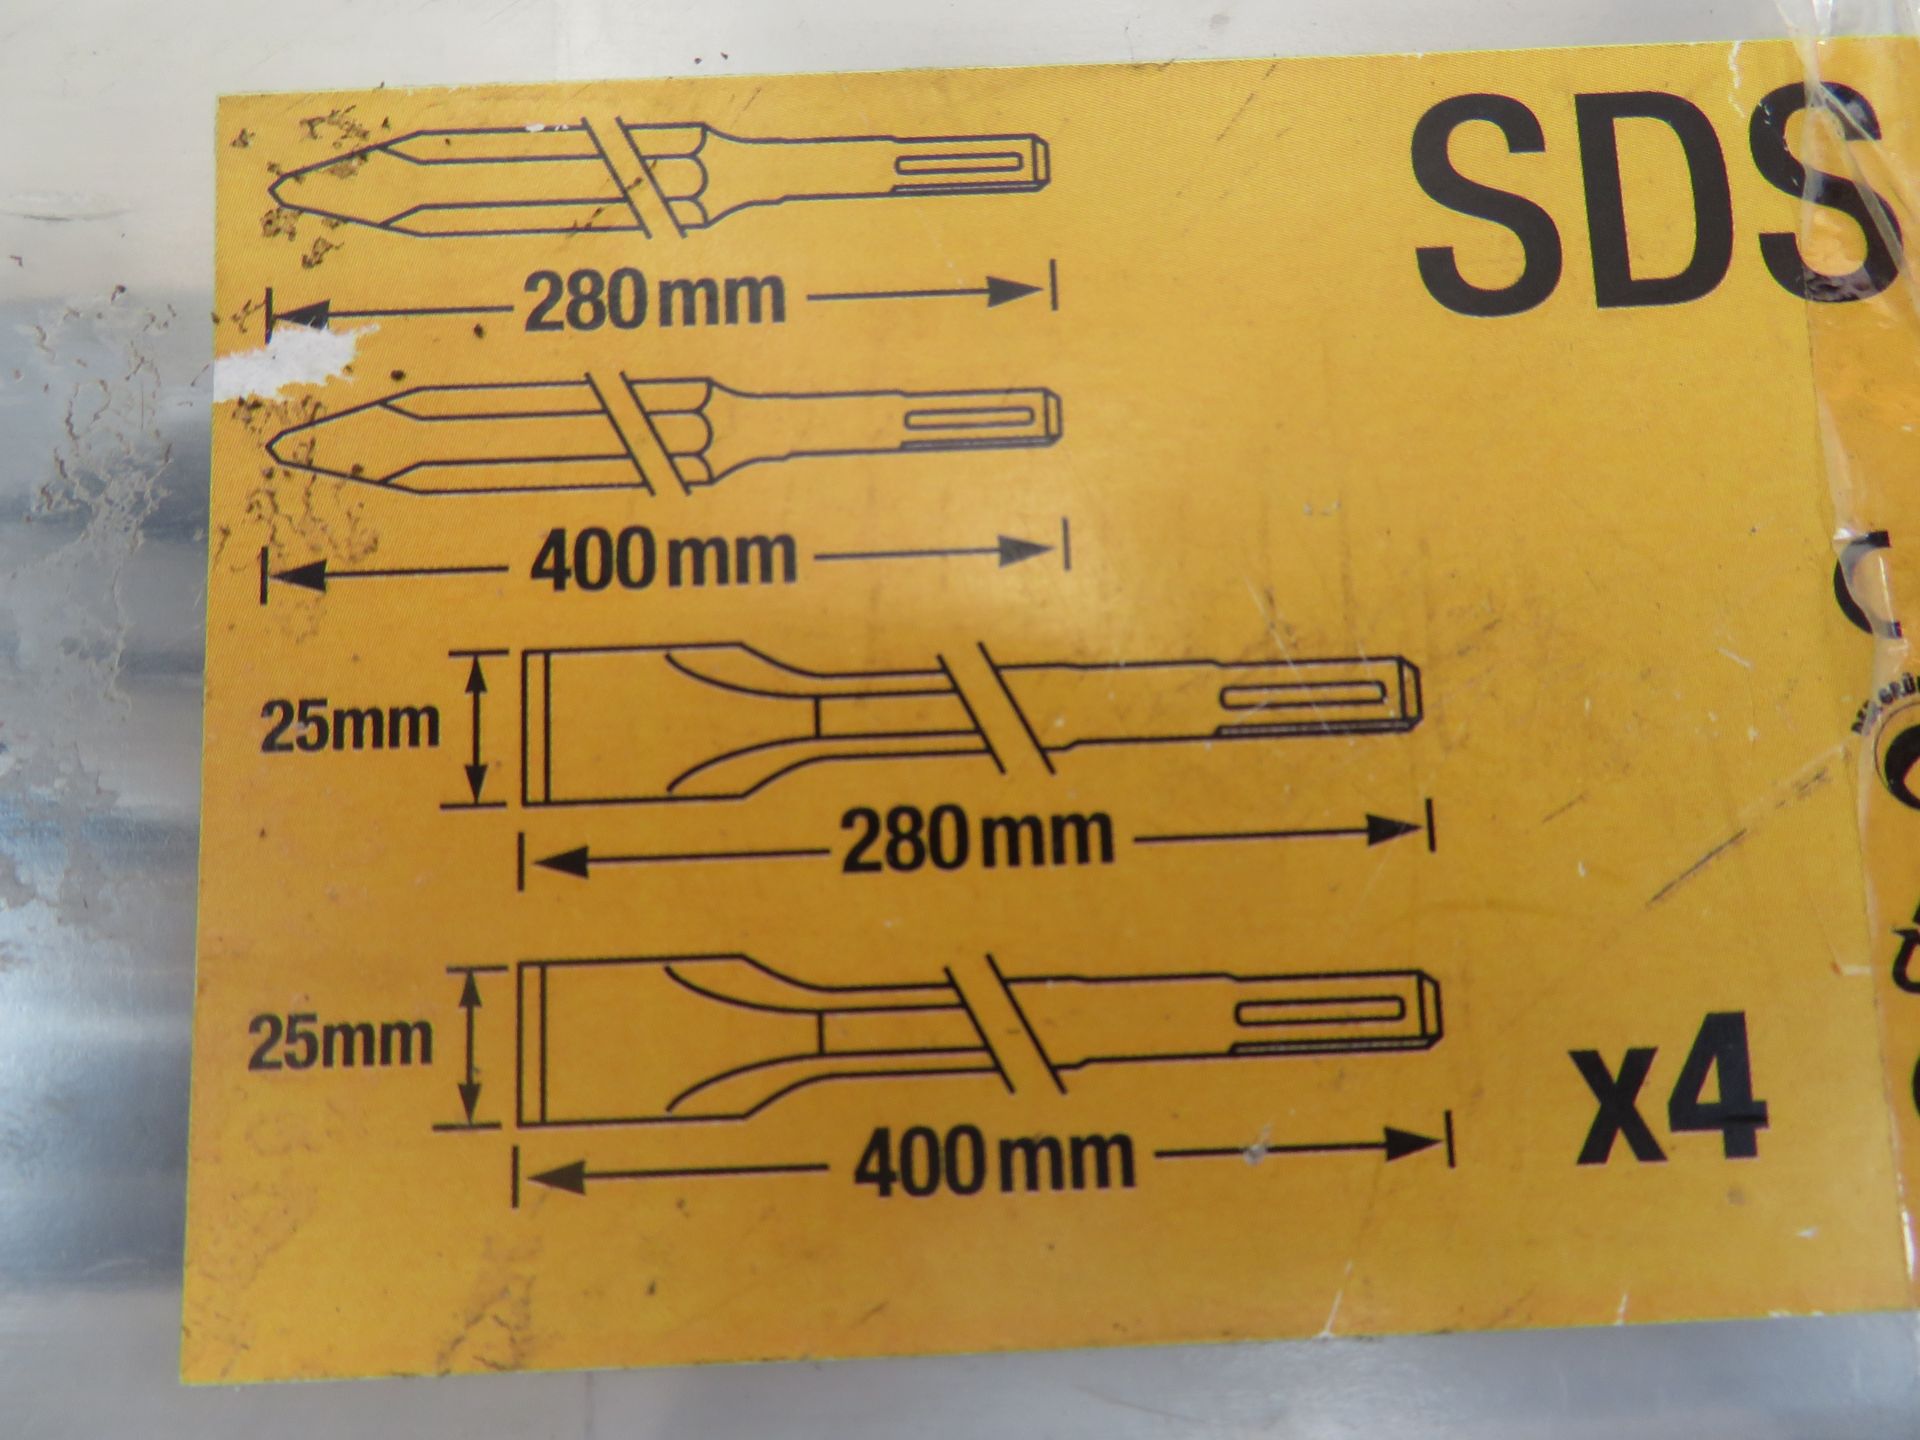 (A26) Dewalt Sdsmaxset Set Of Chisels Pointed And Flat 4 Piece- New Condition, Slightly Tatty Box. - Image 4 of 4